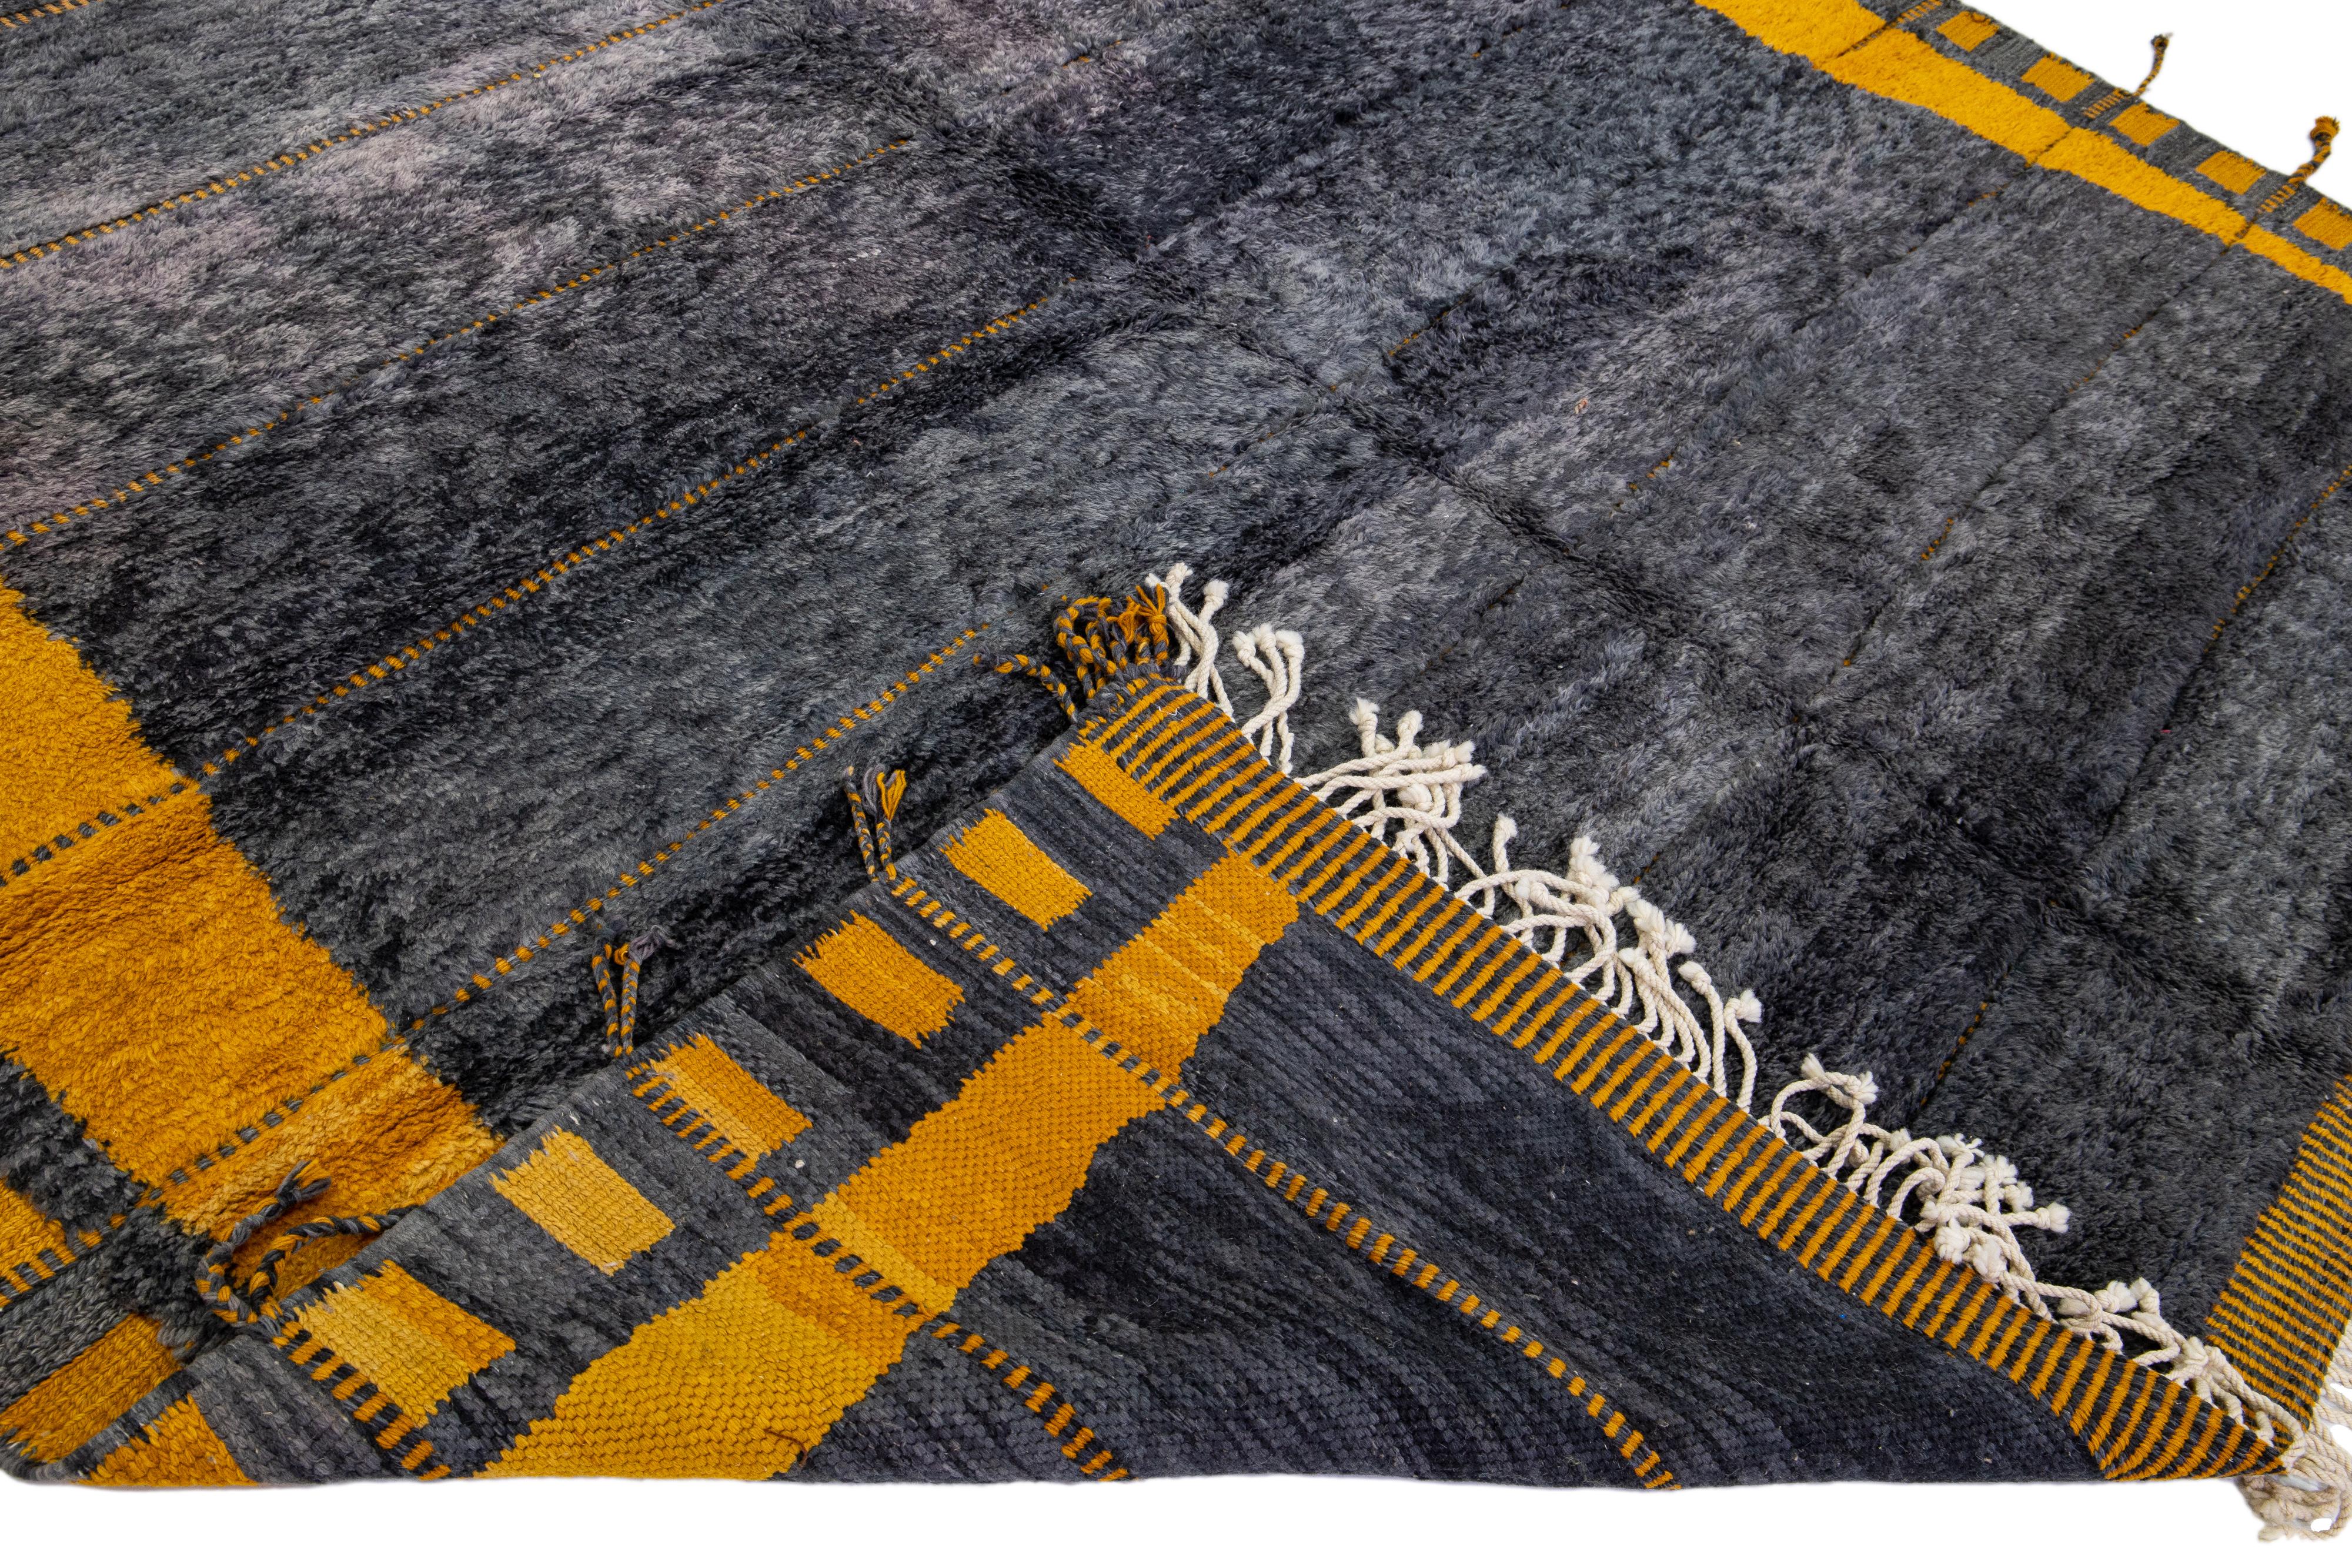 Beautiful Moroccan hand-knotted wool rug with a gray field. This Modern rug has yellow accent color and beige fringes in a gorgeous Geometric pattern design.

This rug measures: 11'4